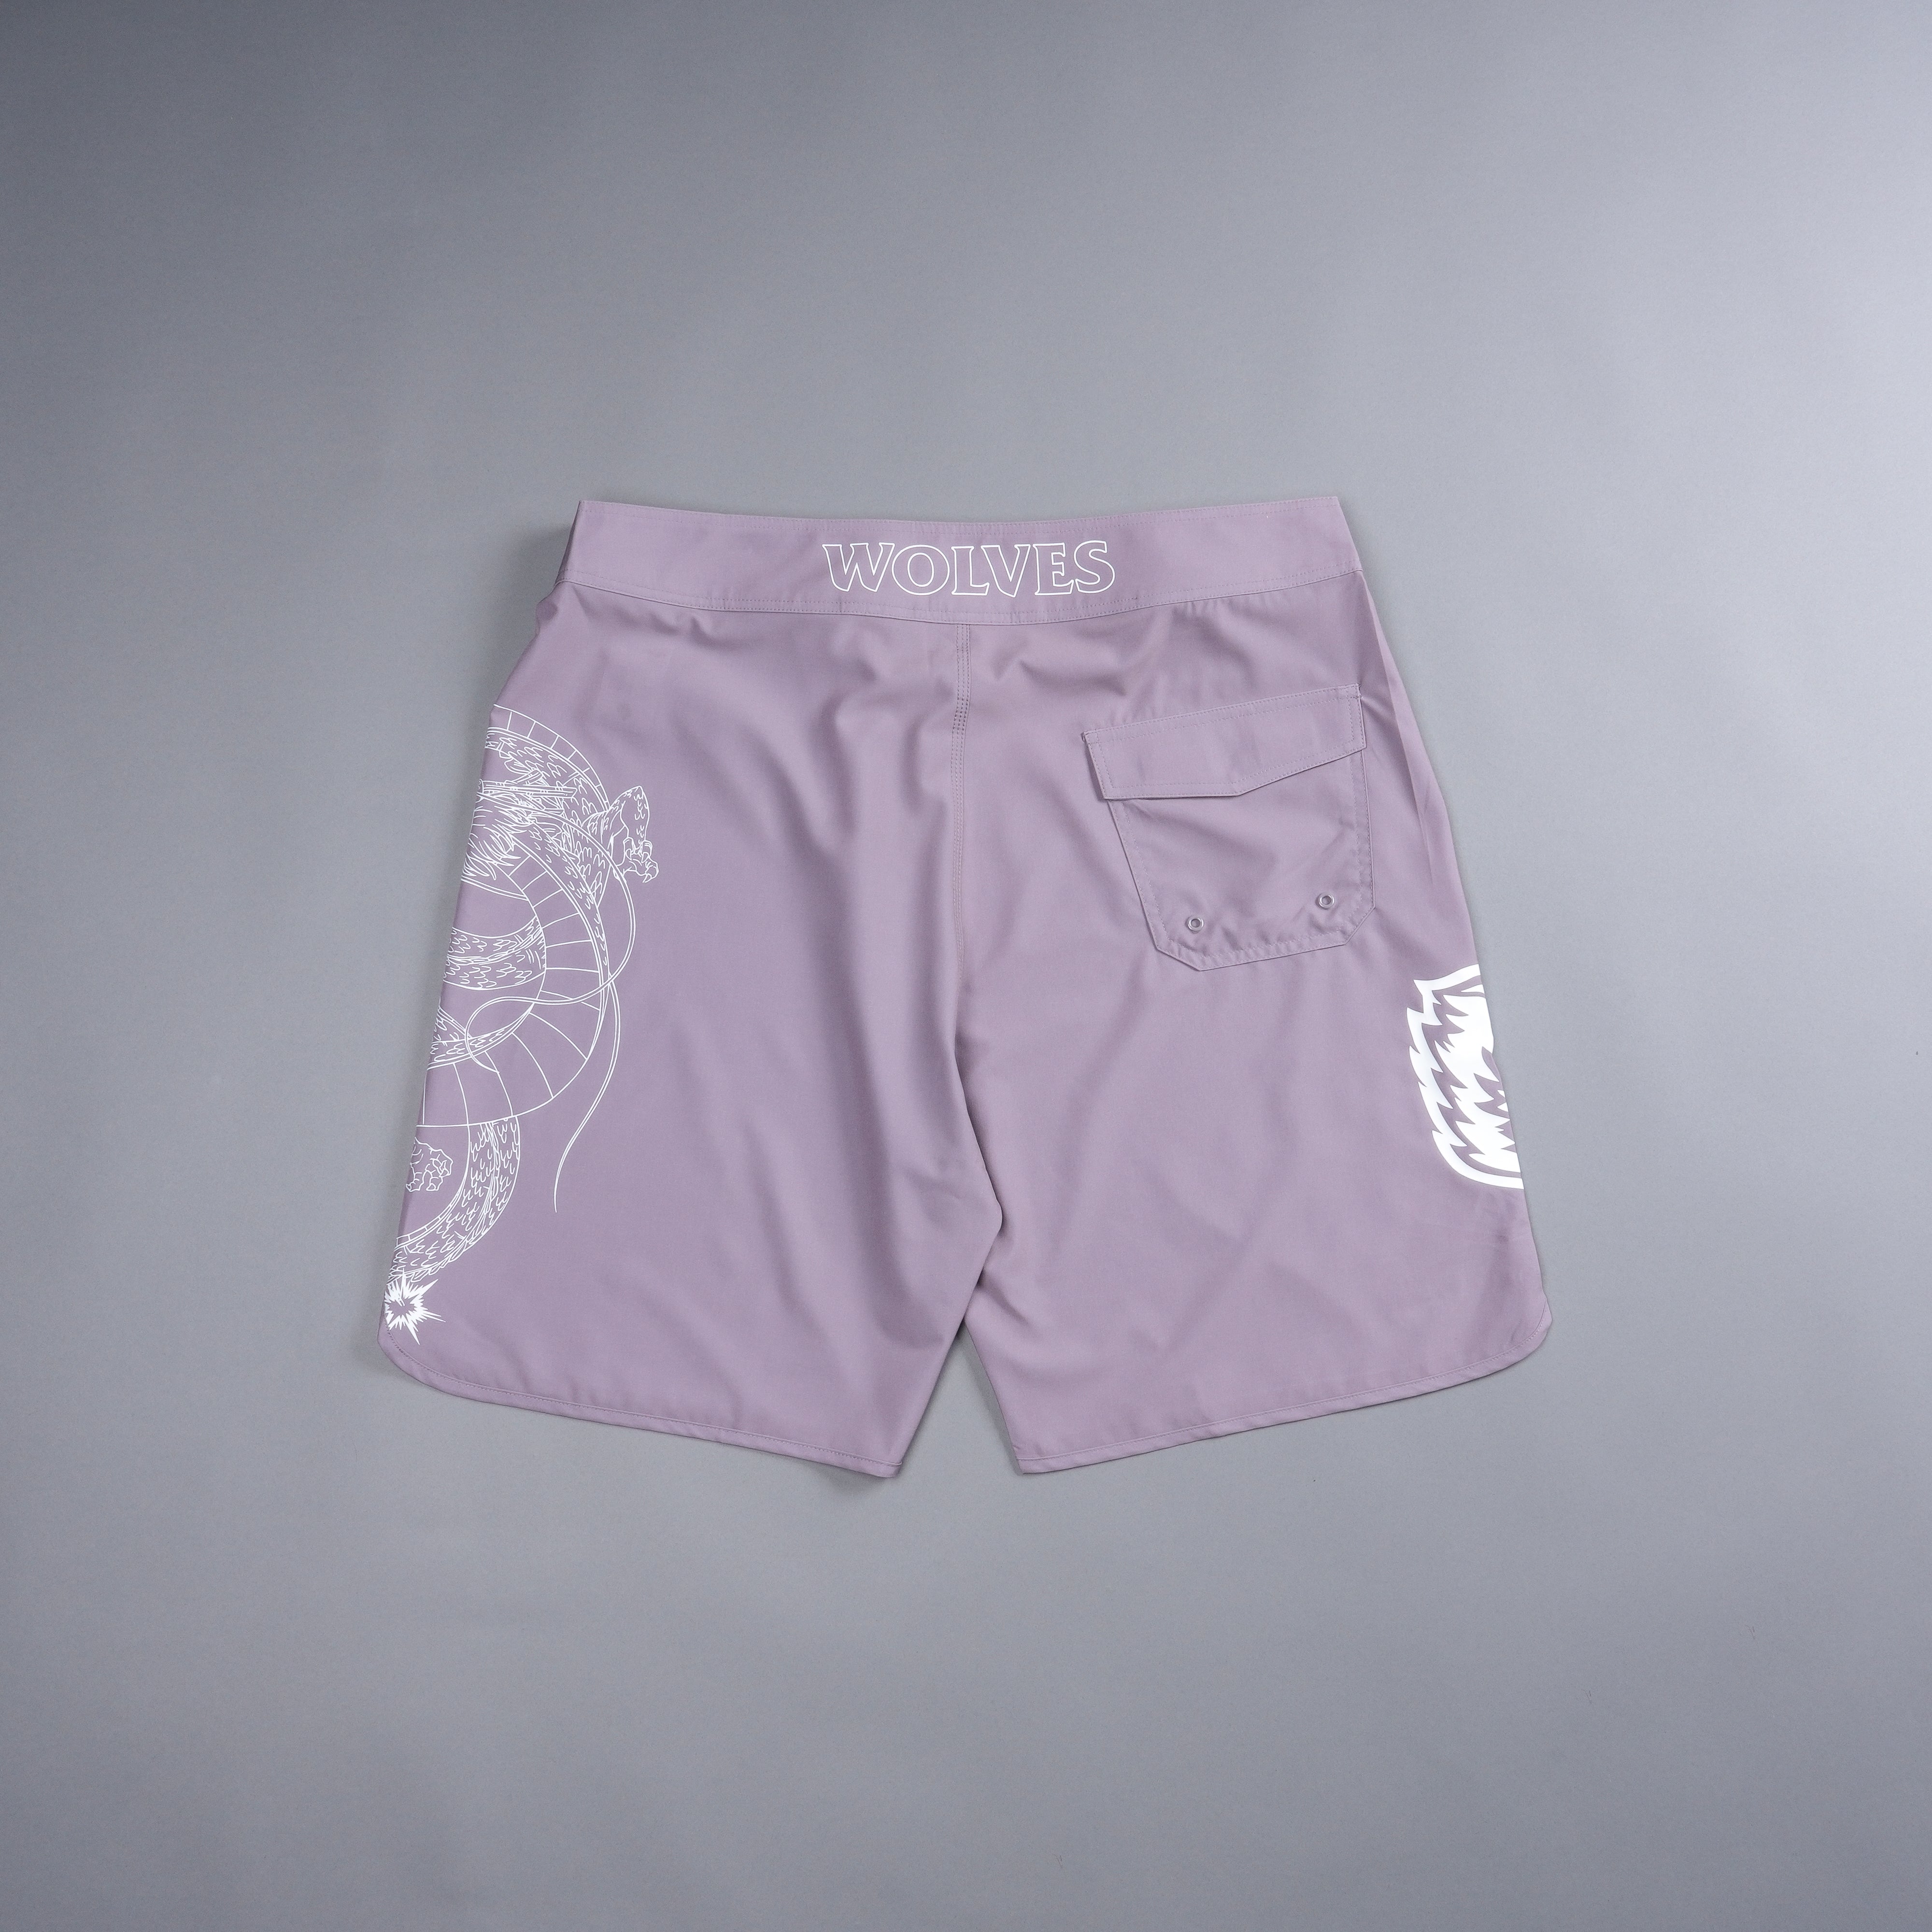 Shenron War Ready Stage Shorts in Pale Gray